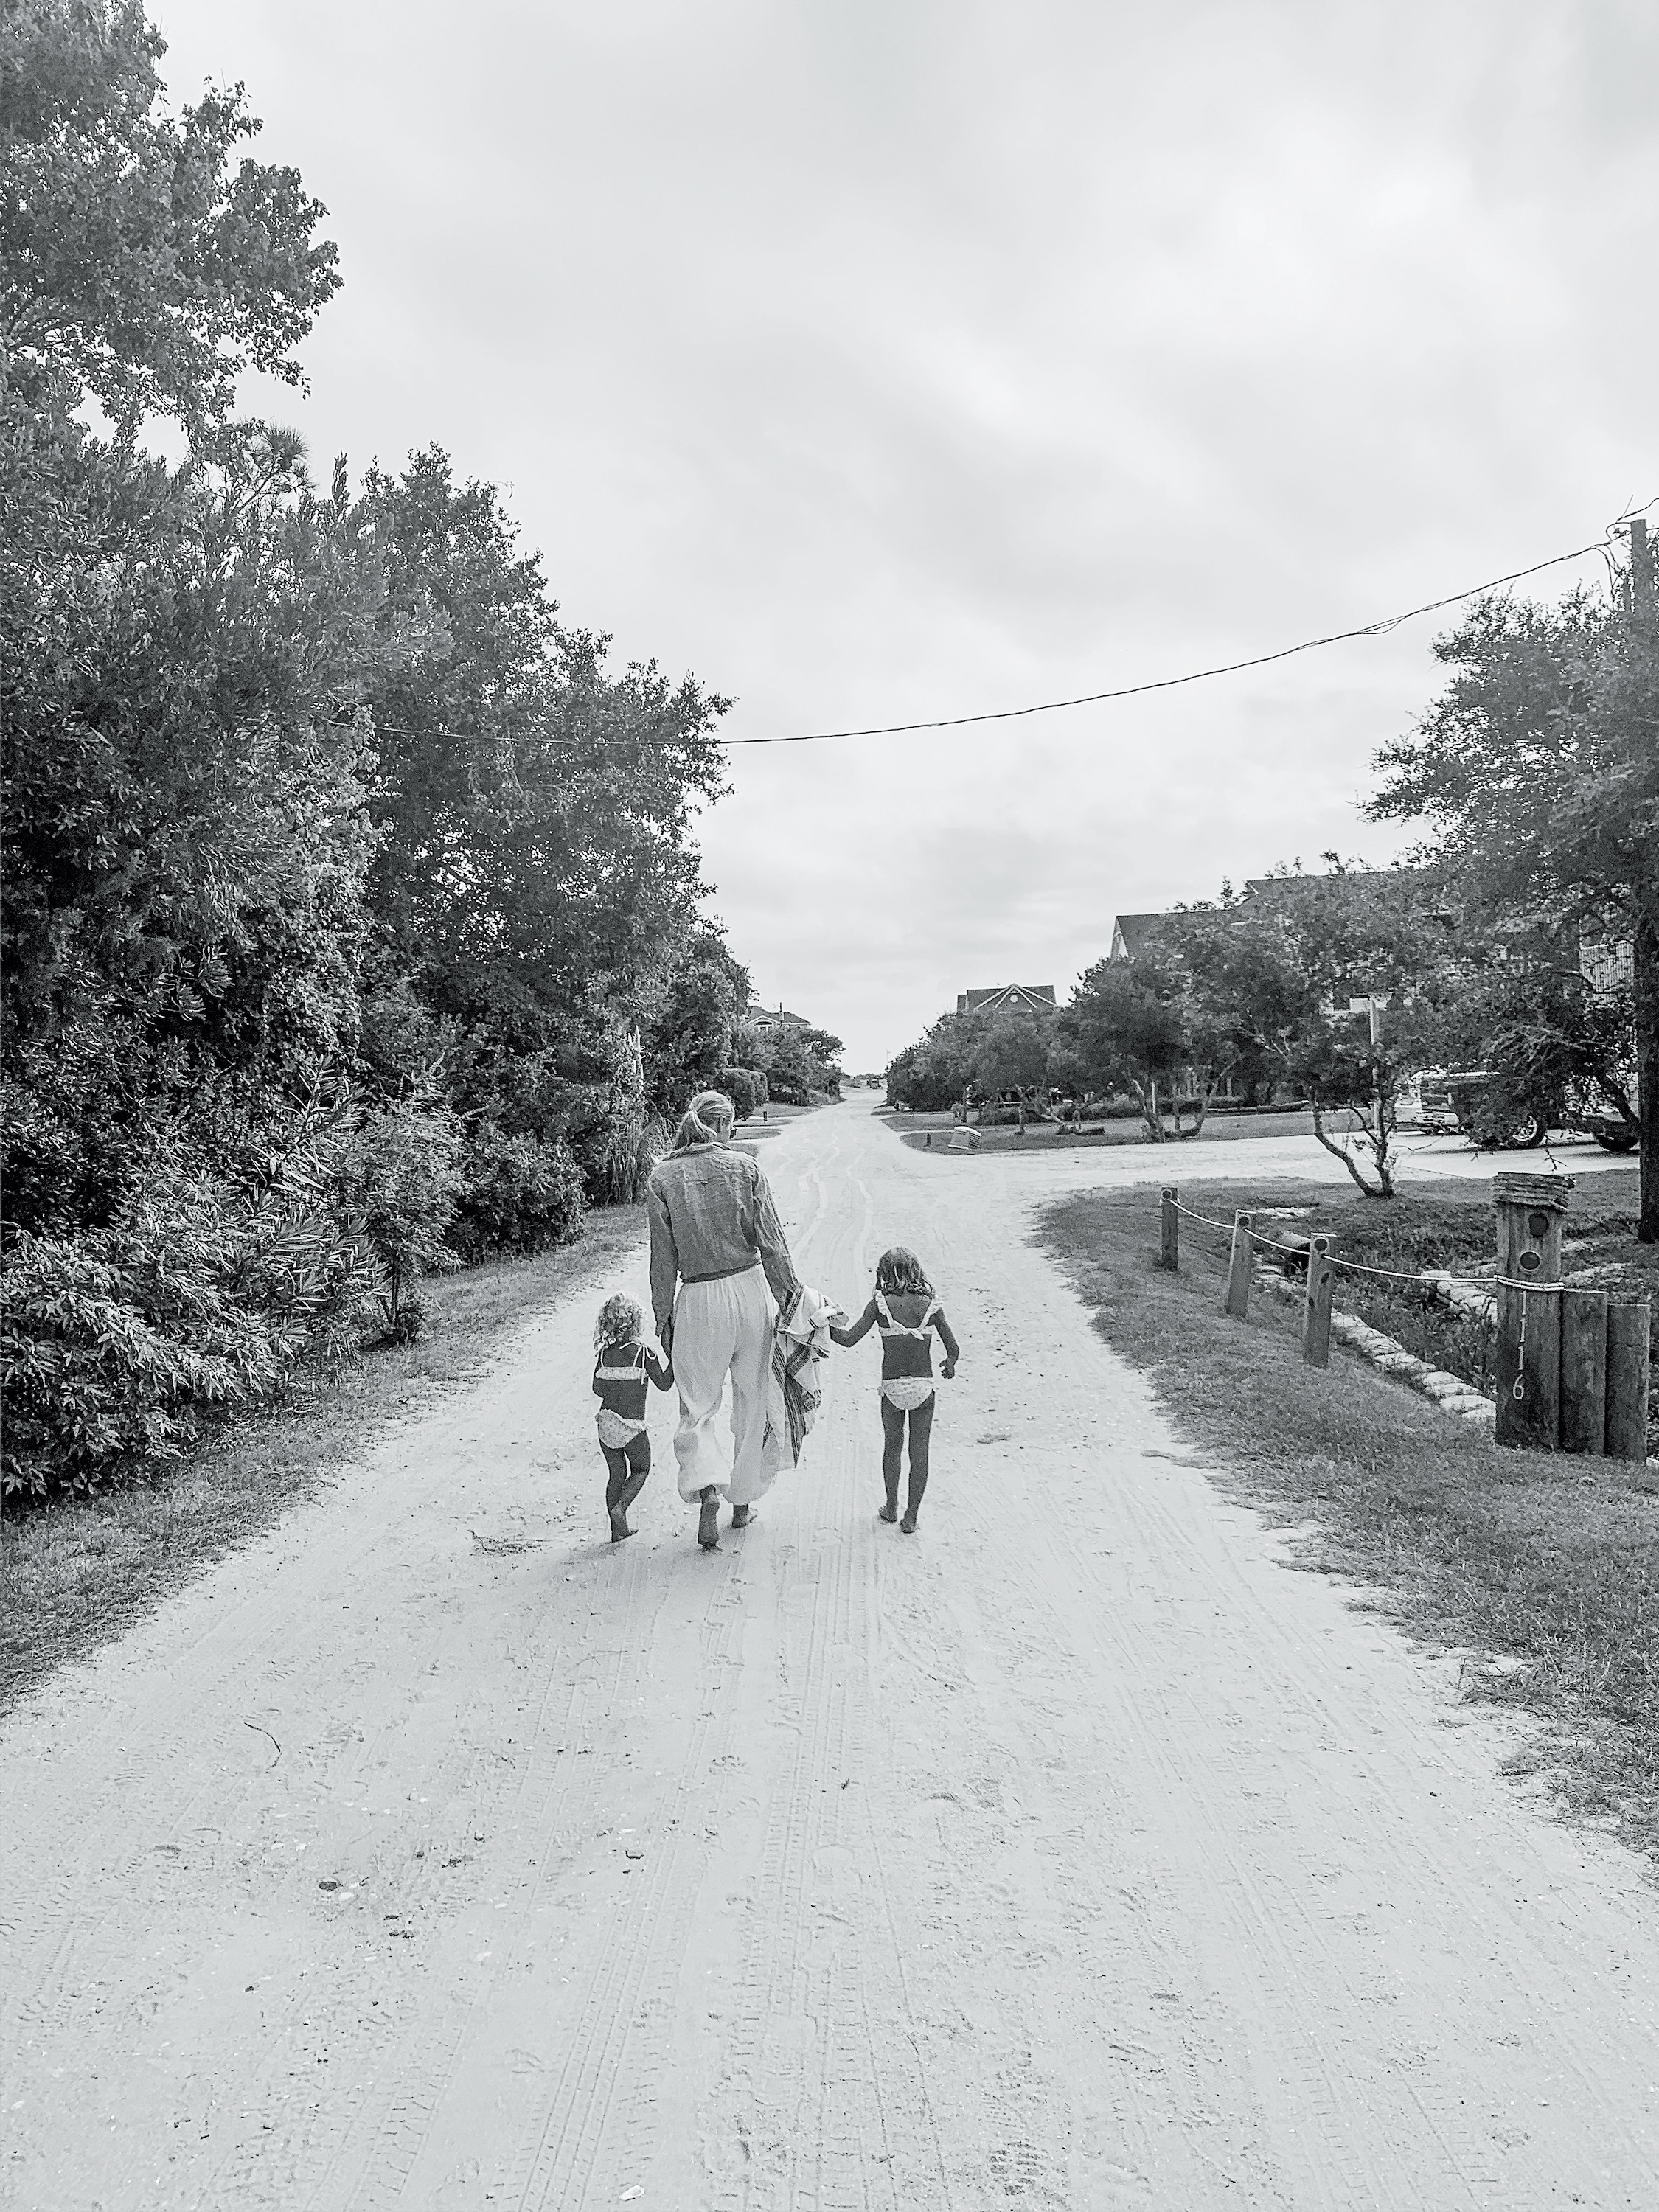 A black and white photo of a woman and two children walking on a beach path